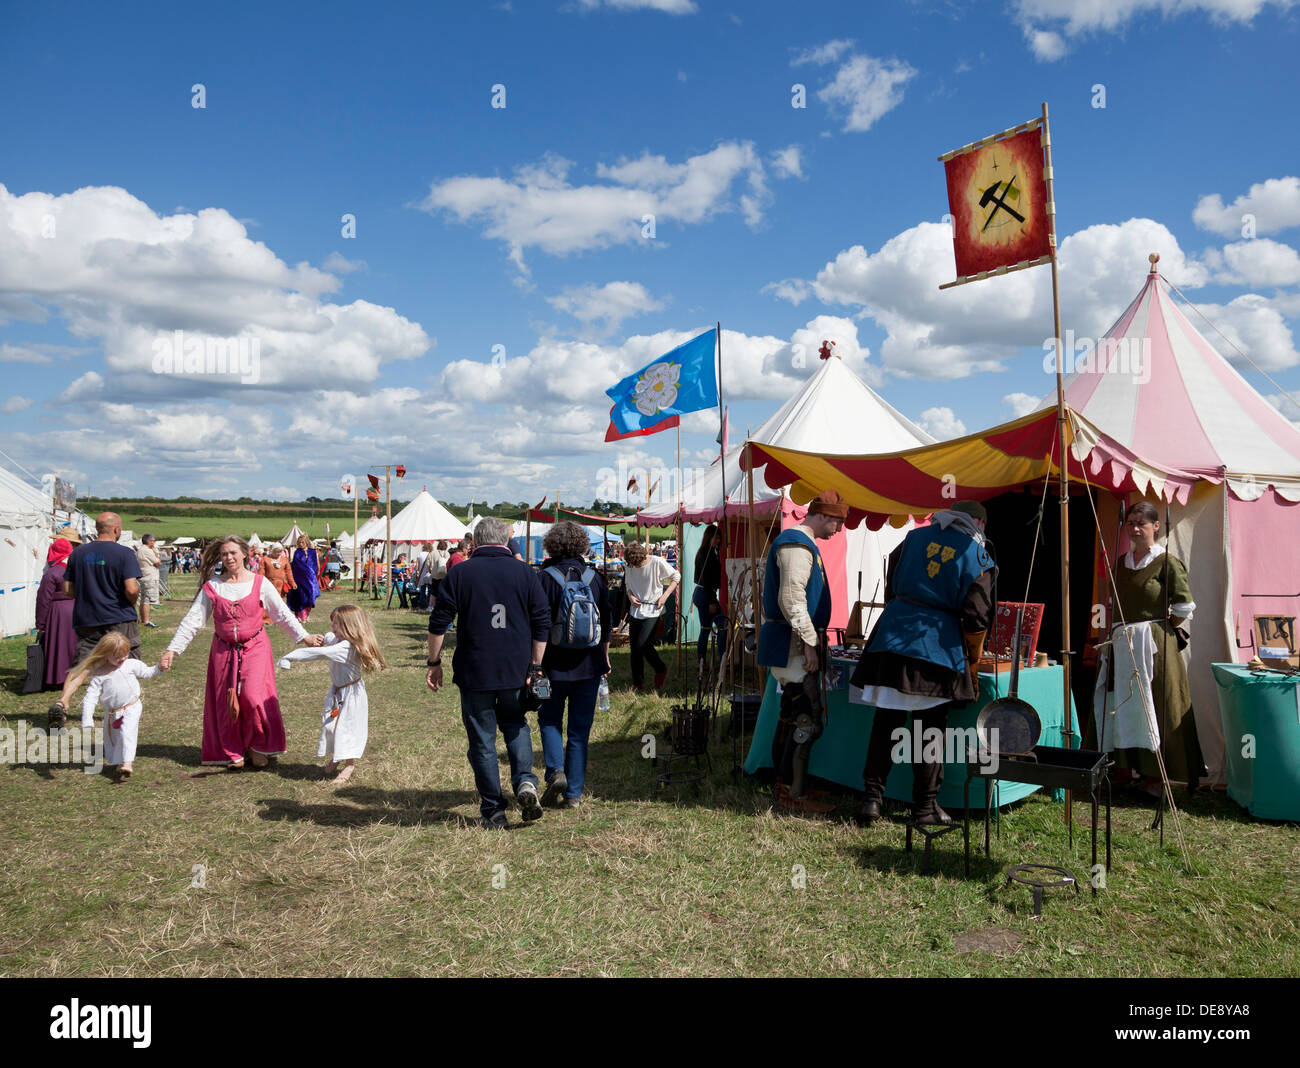 Wars of the Roses Federation followers at the Battle of Bosworth re-enactment Hinckley Leicestershire England GB UK EU Europe Stock Photo